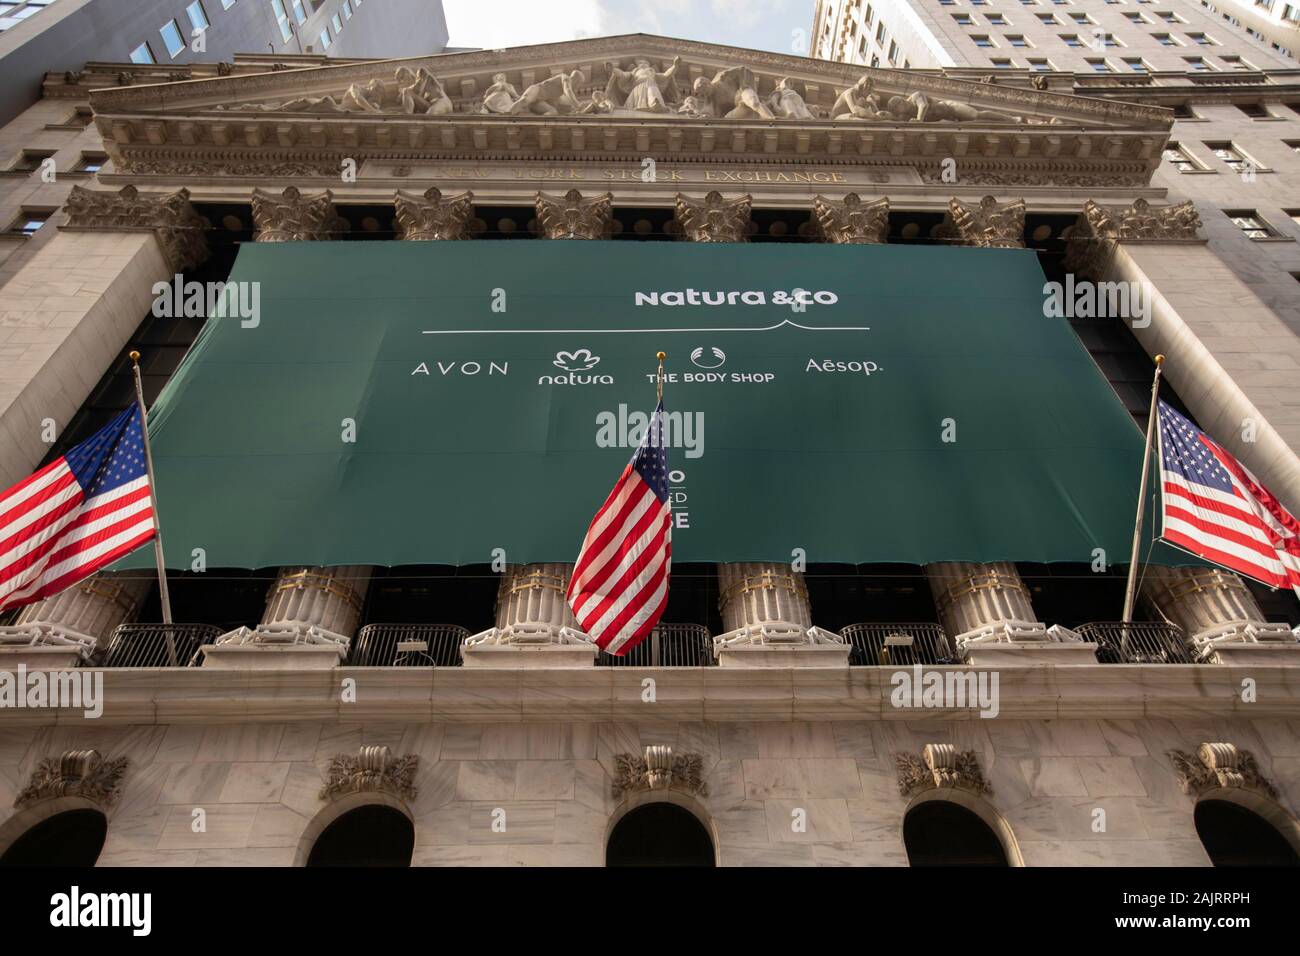 Nova Iork, Estados Unidos. 05th Jan, 2020. Facade of the New York Stock  Exchange headquarters is seen with Natura/Avon announcement on Sunday  afternoon (05). Company has 'IPO' sched fed for this Monday.